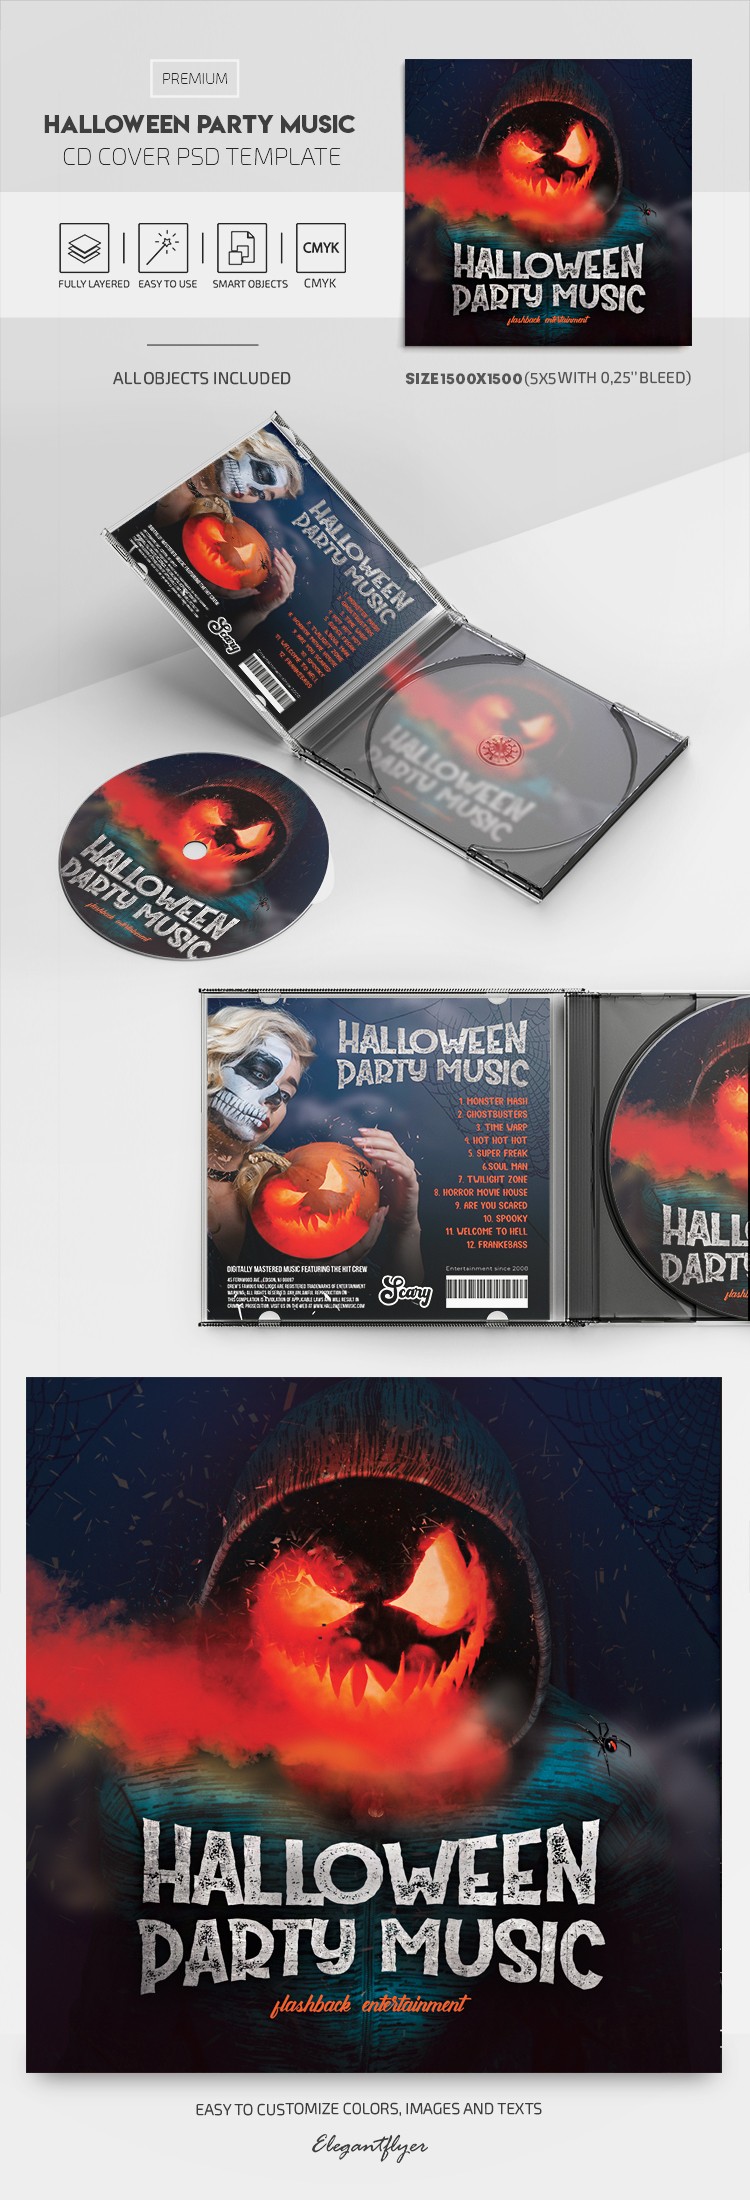 Halloween Party Musik CD Cover by ElegantFlyer